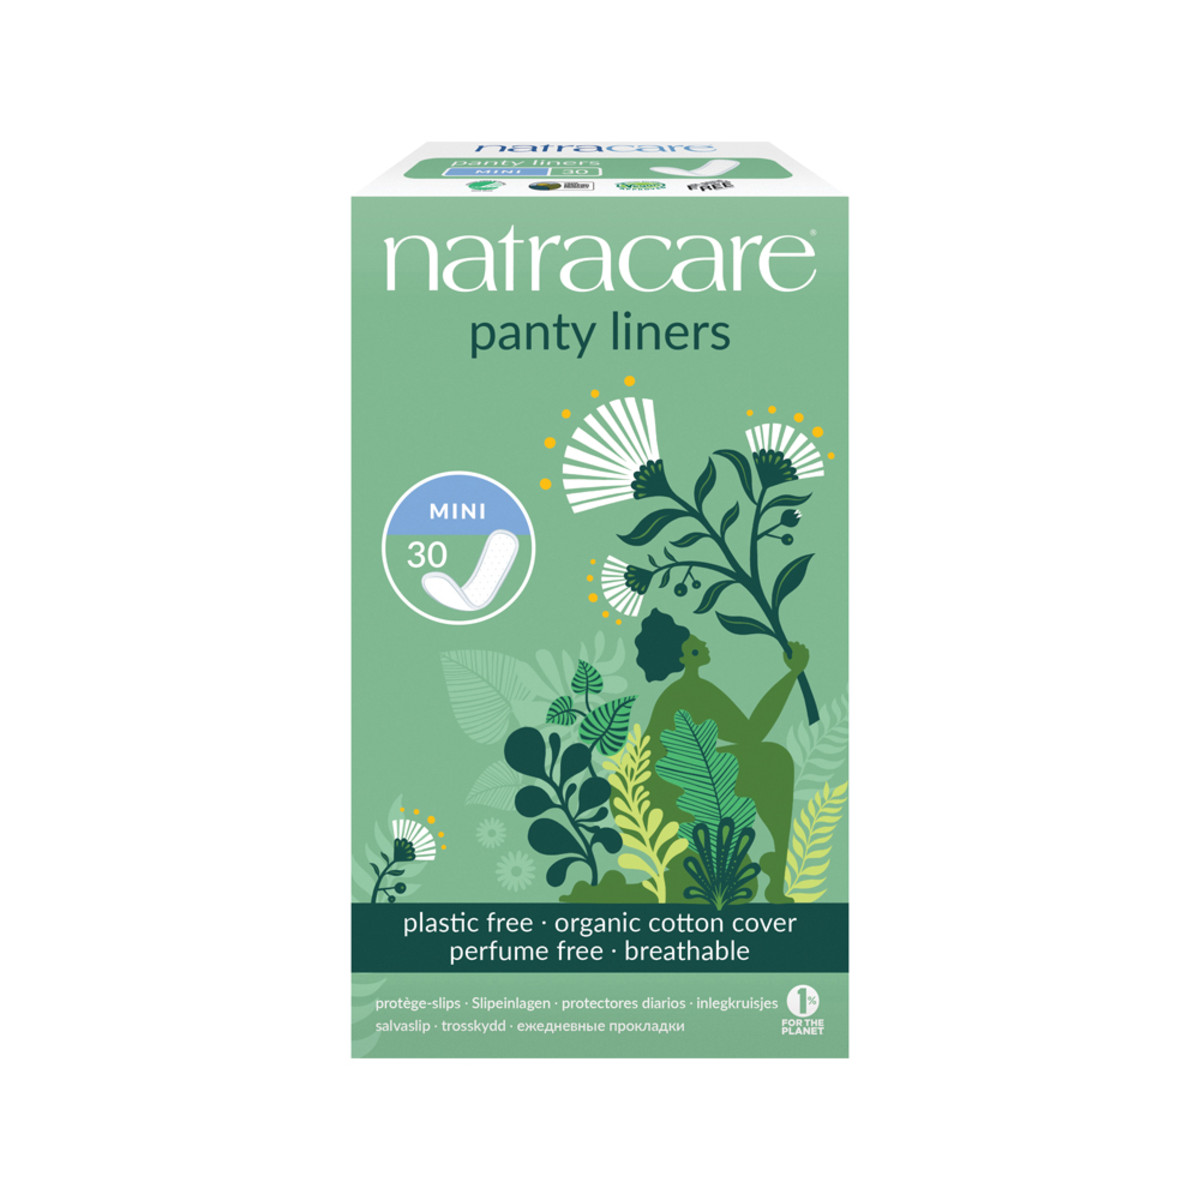 Natracare Panty Liners Mini with Organic Cotton Cover x 30 Pack